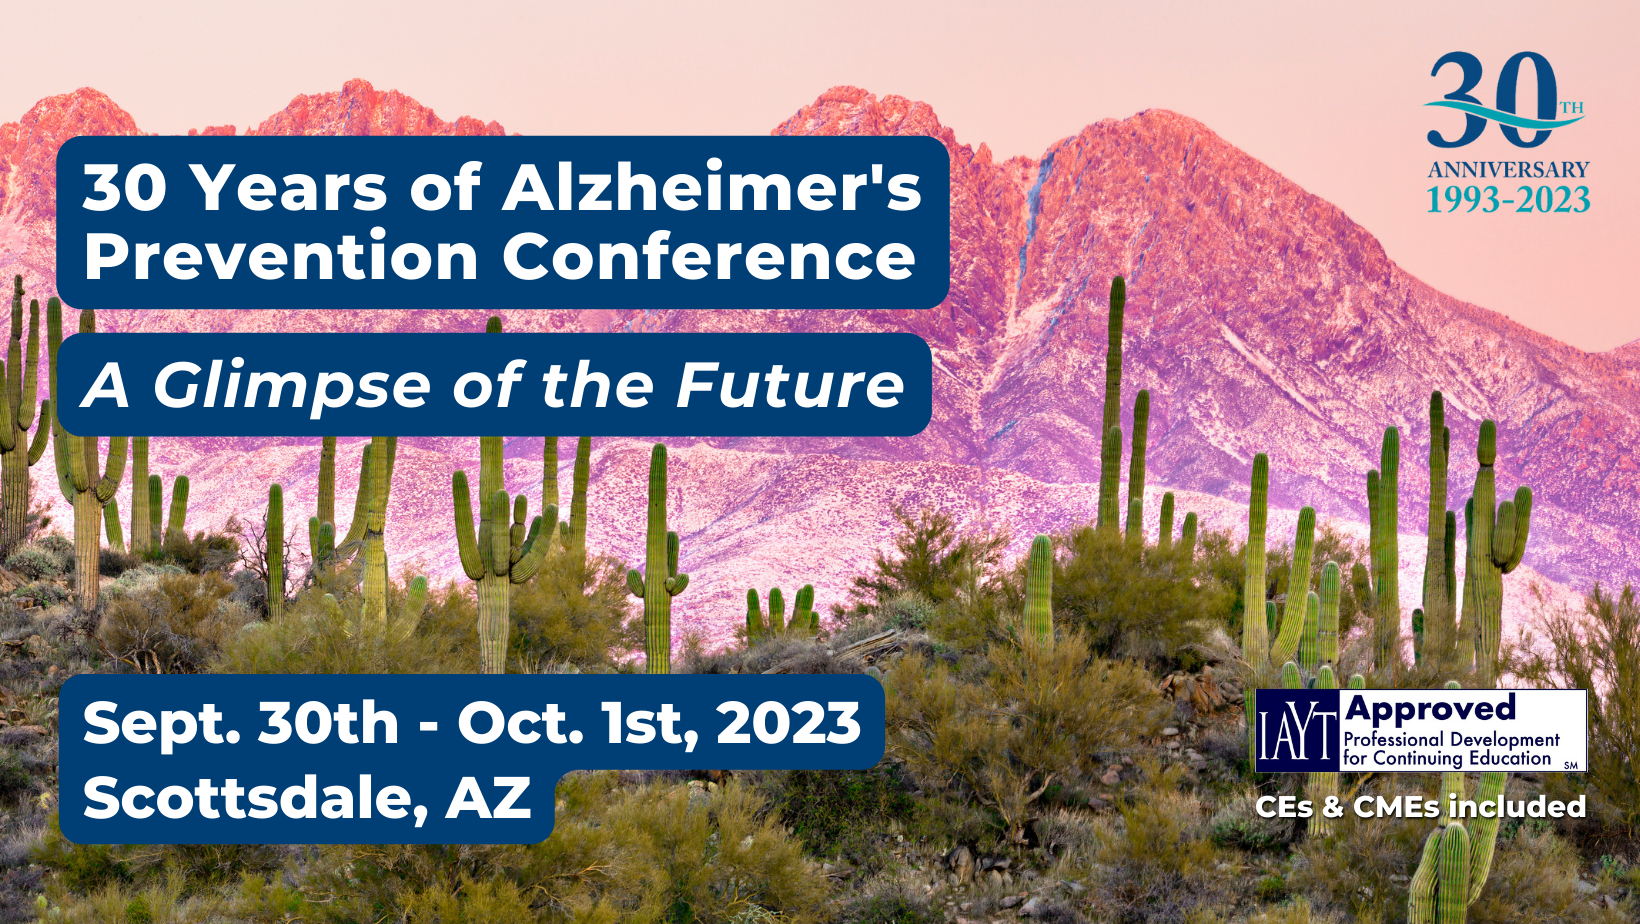 30 Years of Alzheimer's Prevention Conference